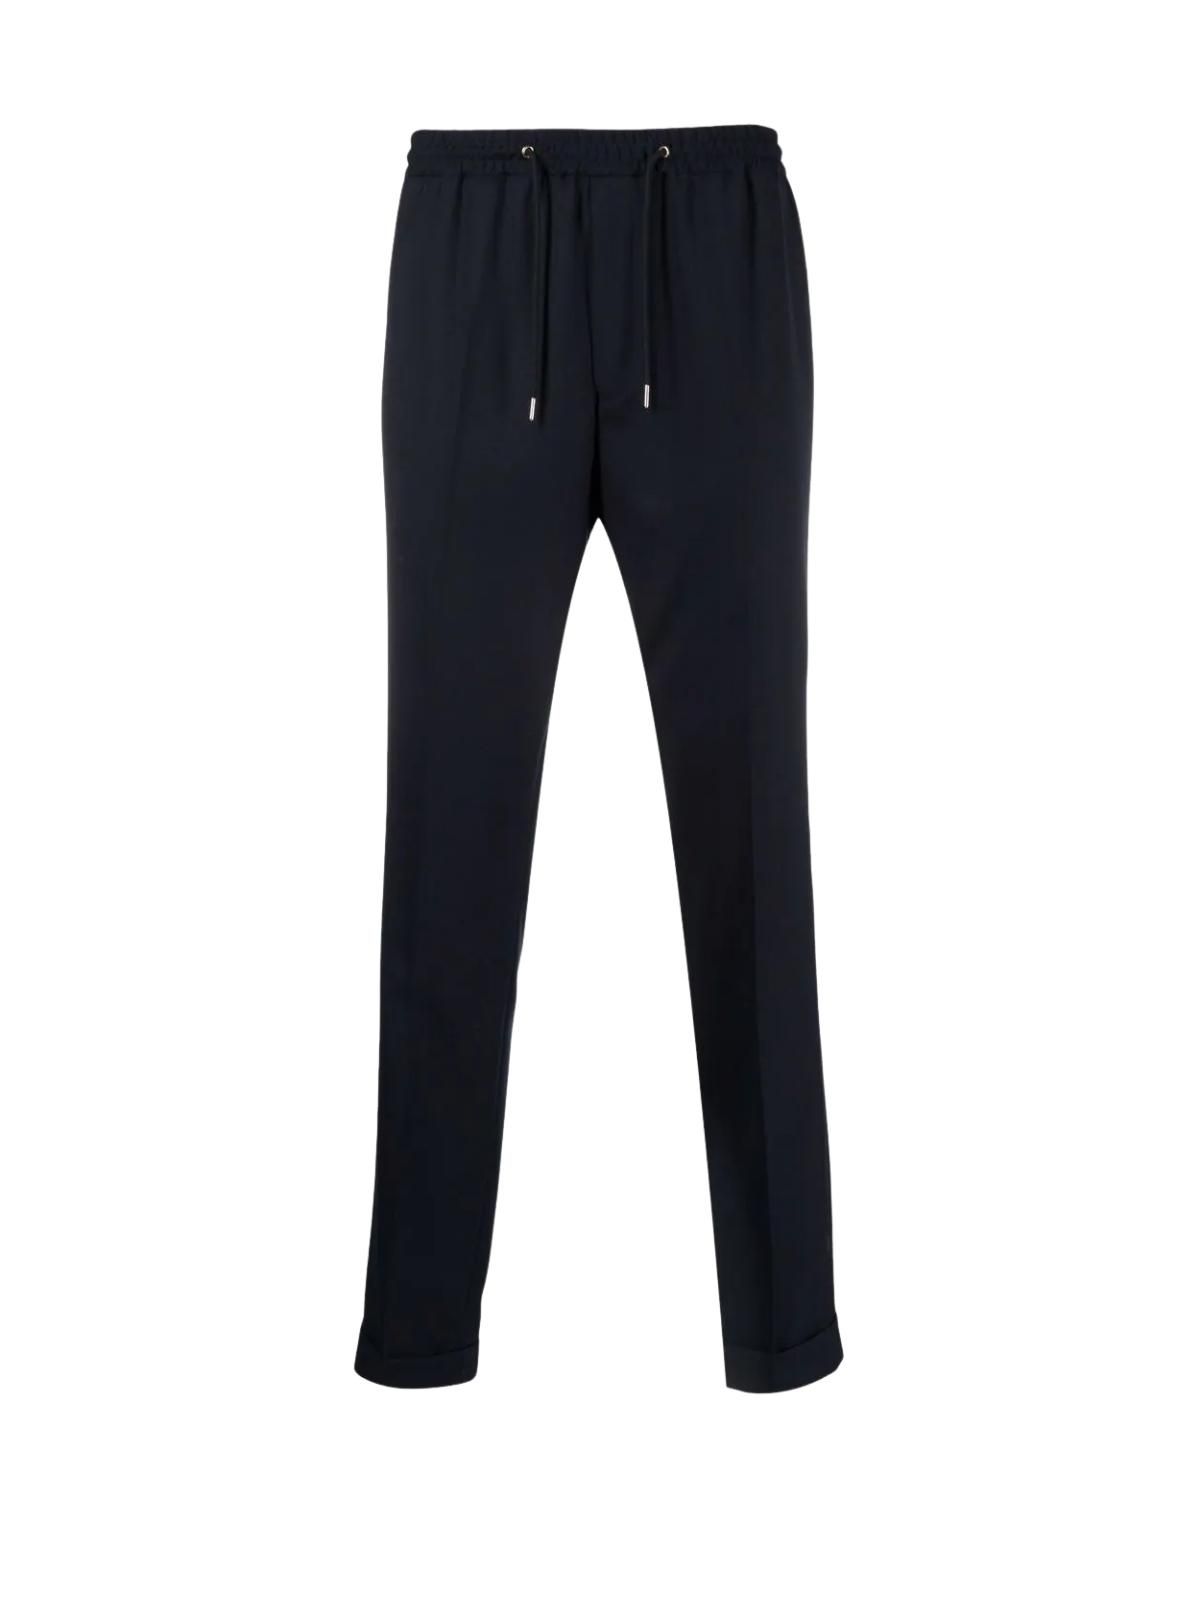 Shop Paul Smith Gents Drawcord Trousers